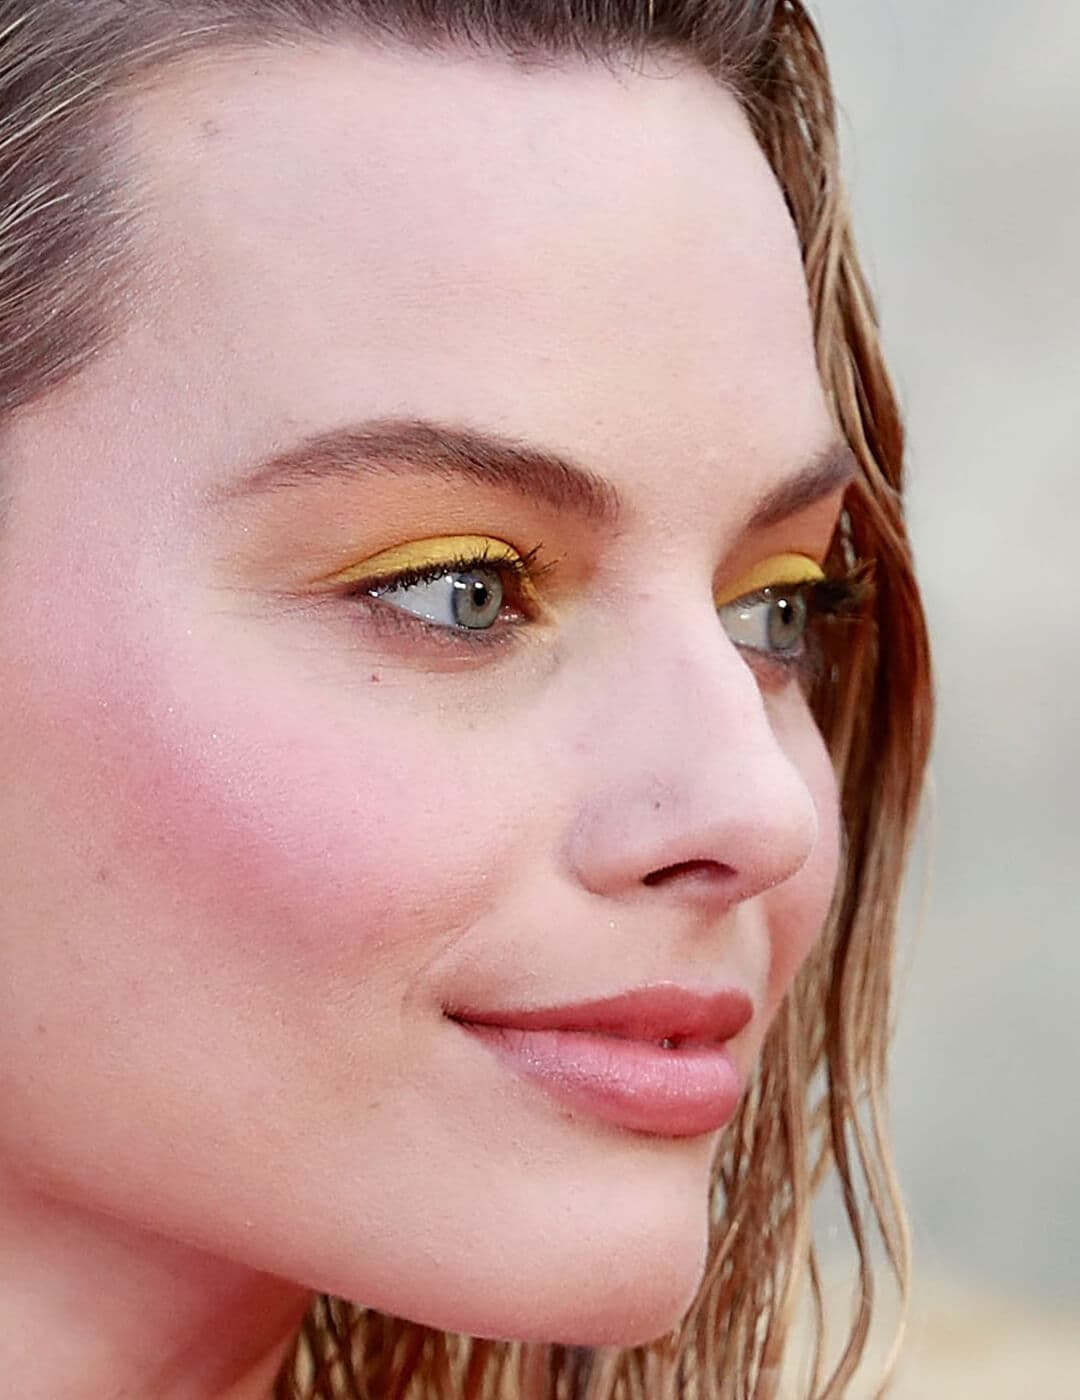 Close-up side profile image of Margot Robbie rocking a bright yellow eyeshadow makeup look